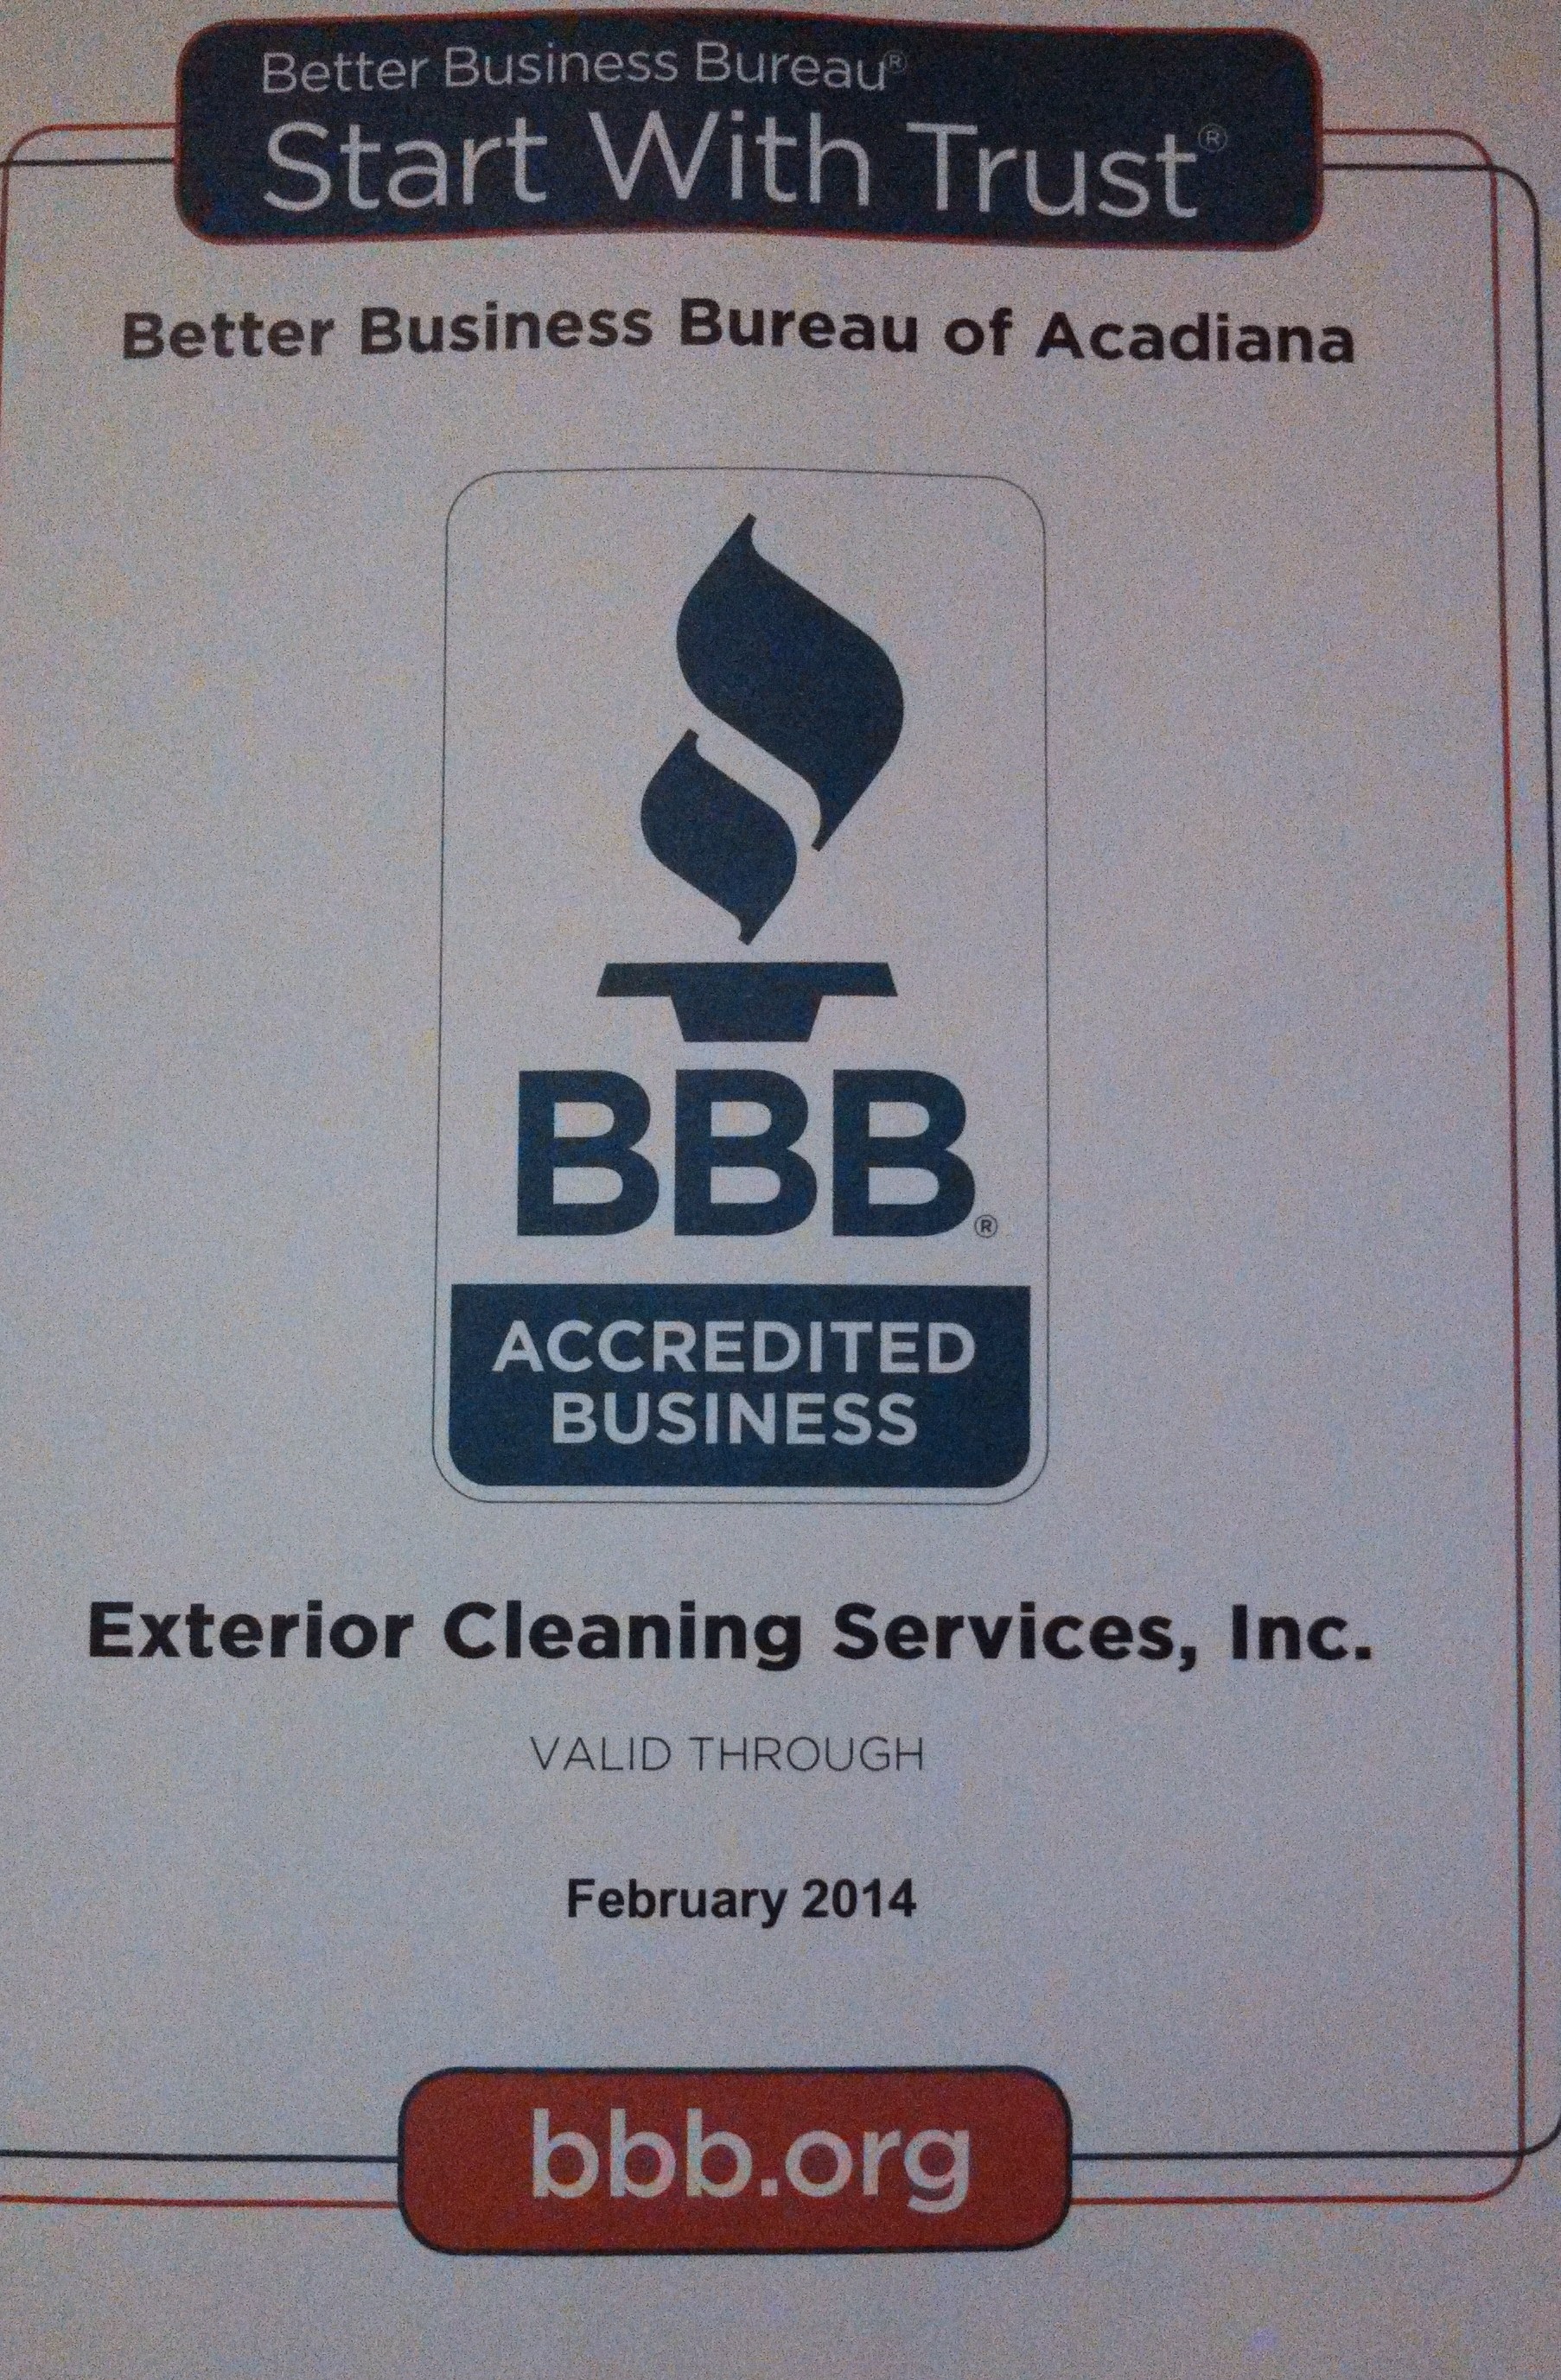 Accredited by the Better Business of Acadiana